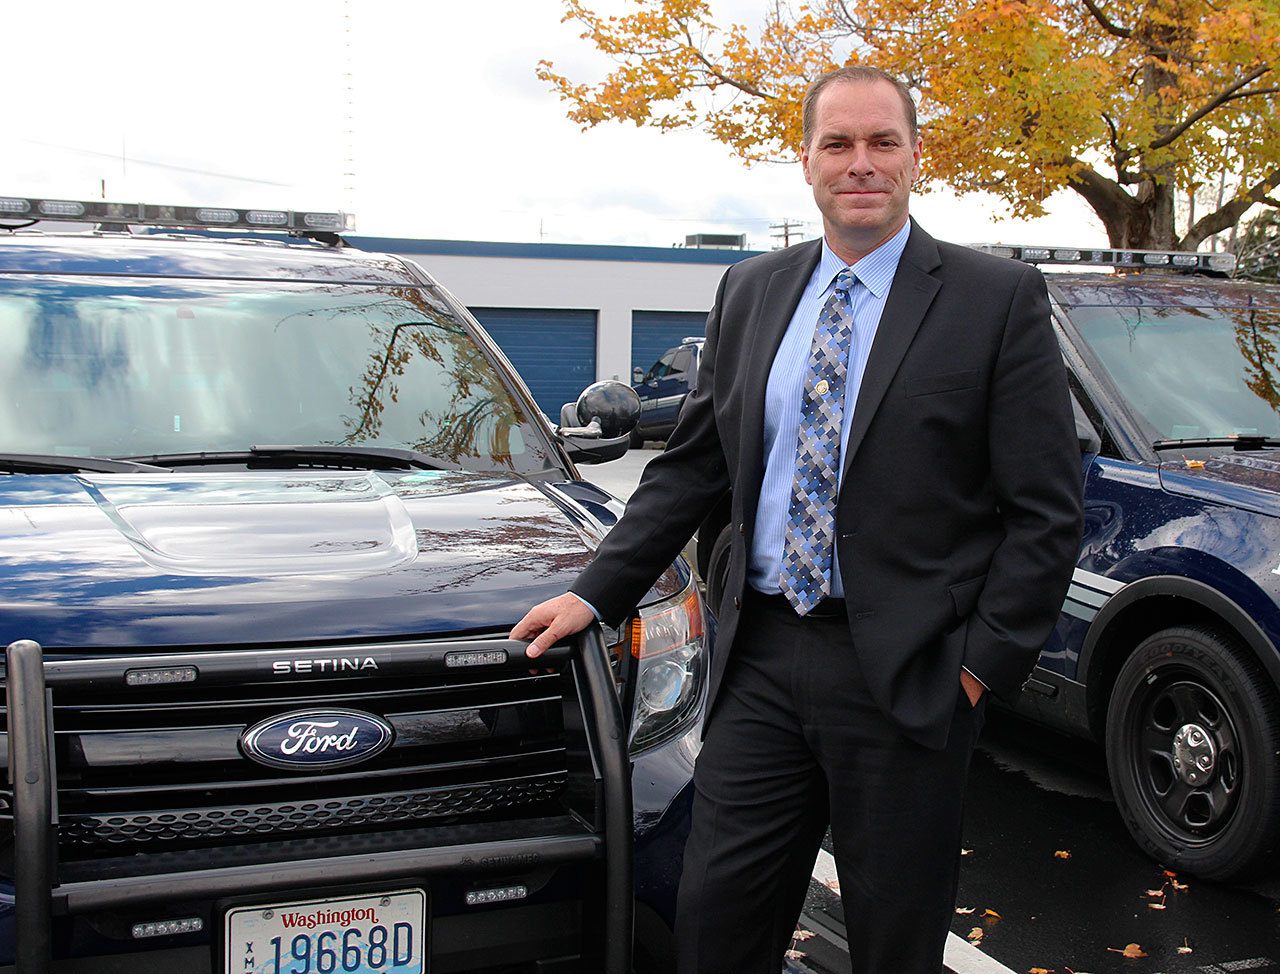 Kevin Dresker takes over this month as the new Oak Harbor police chief. (Jessie Stensland / Whidbey News-Times)